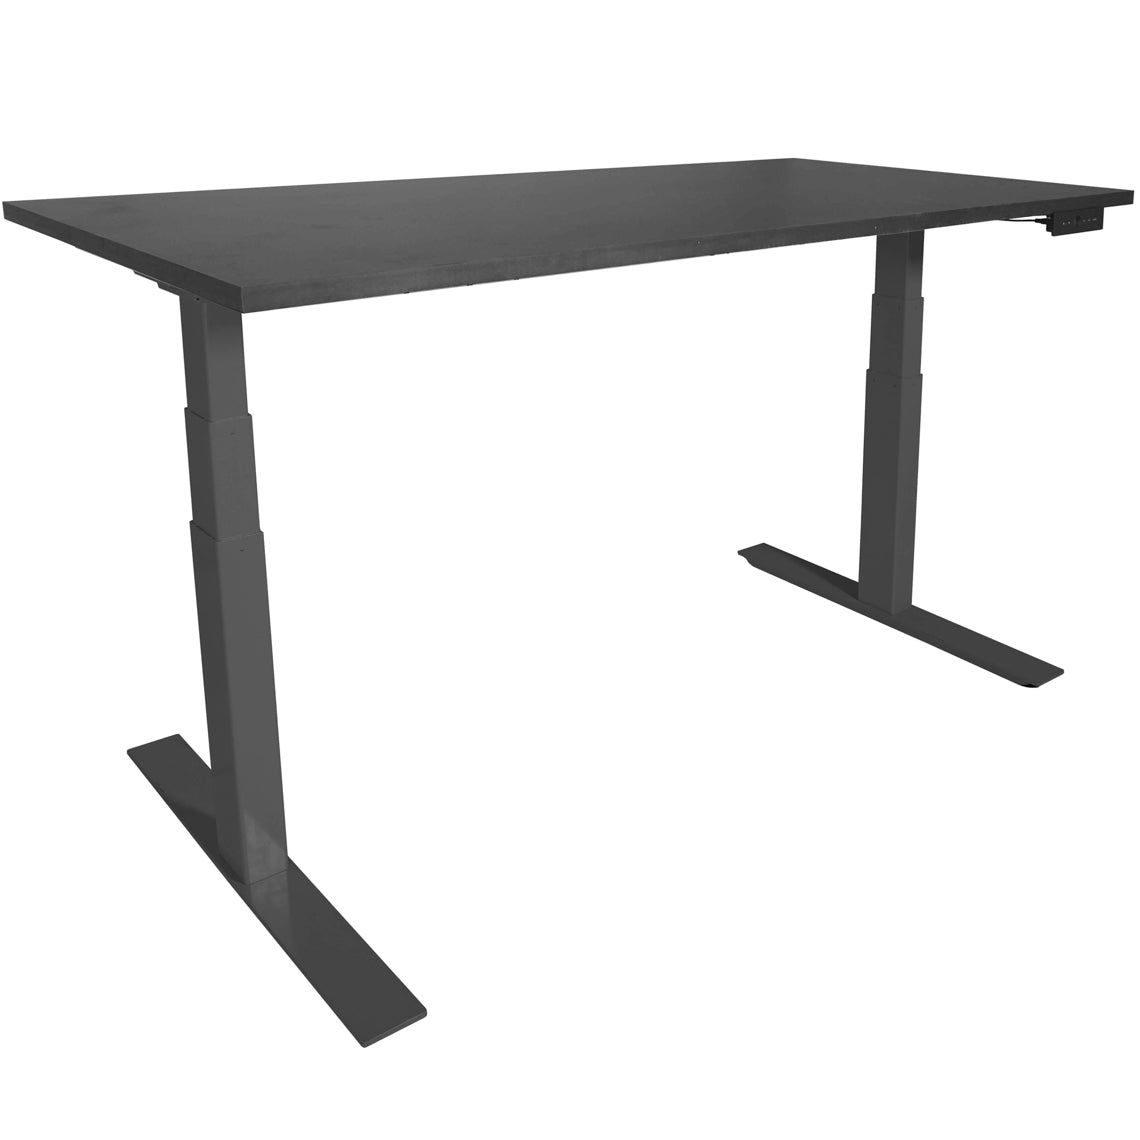 A6 Adjustable Sit To Stand Desk 24"- 50" W/ Black 60" X 30" Top - view 1